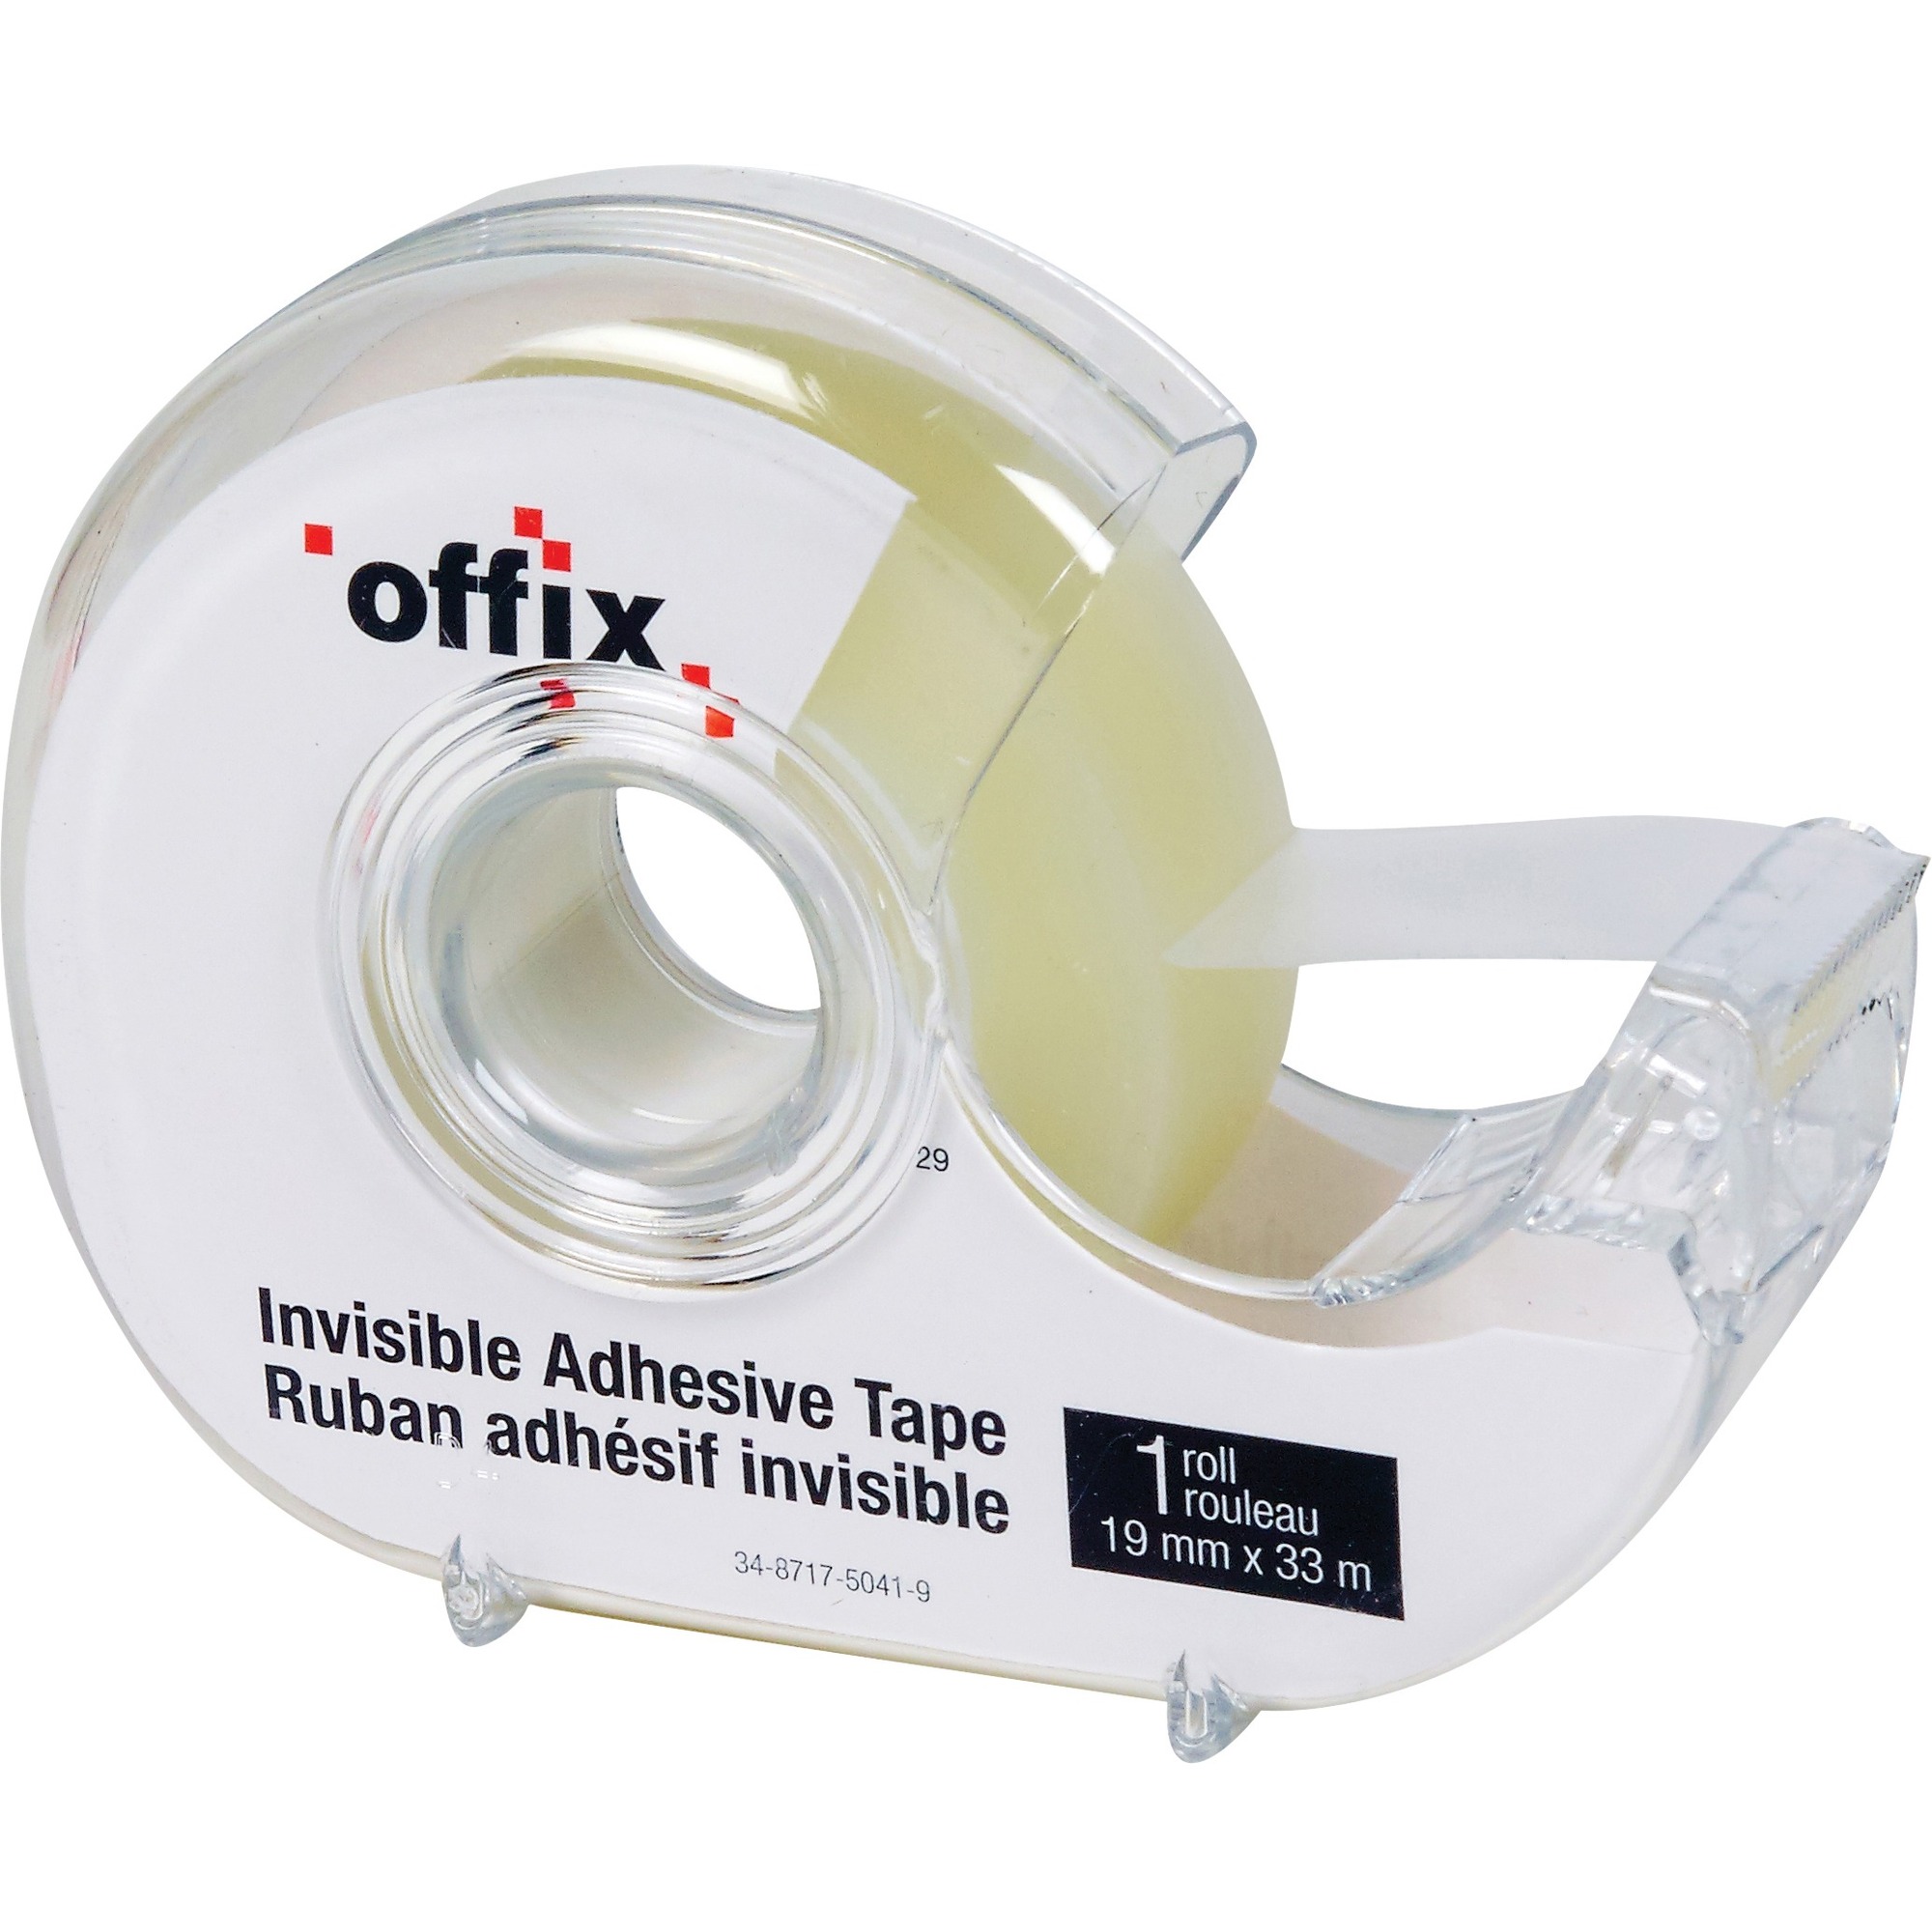 Kendall's Office Supply Ltd :: Office Supplies :: General Supplies :: Tape,  Glue & Adhesives :: Transparent & Invisible Tapes :: Offix Invisible Tape -  36 yd (32.9 m) Length x 0.75 (19 mm) Width - 1 Each